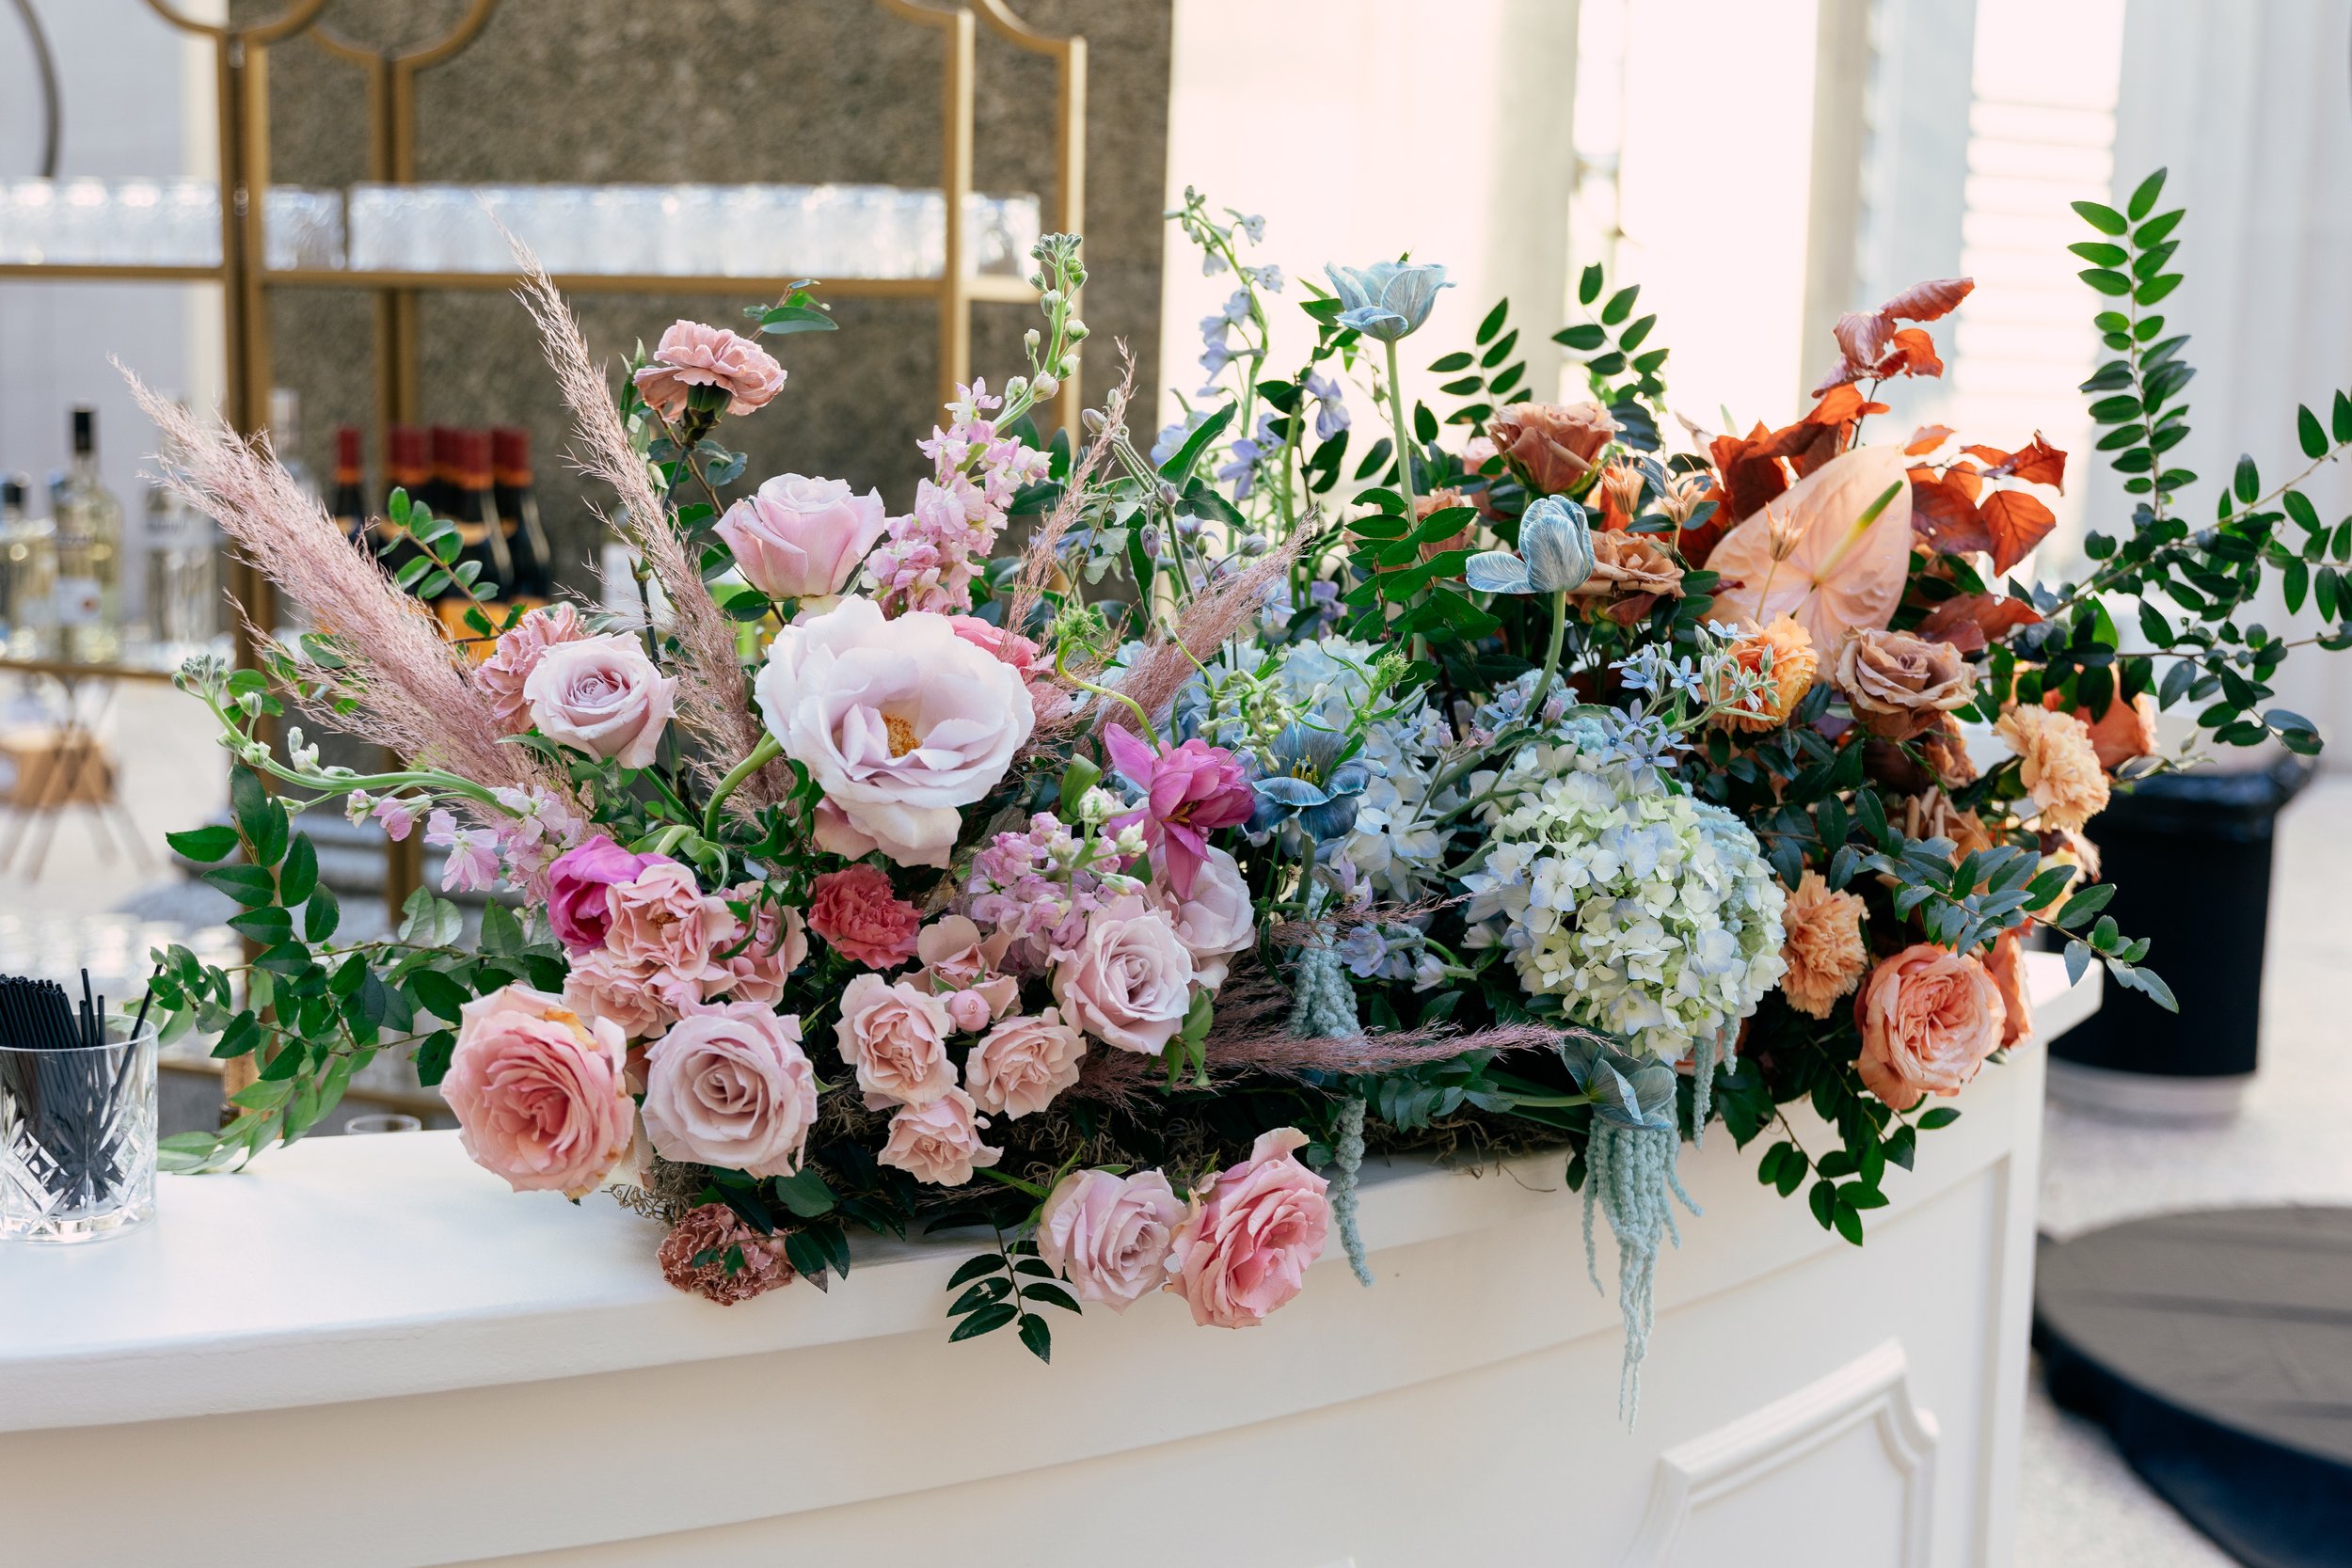 Bright and colorful arrangements create an inviting scene for guests at the TPAC Gala in Nashville Tennessee. Florals composed of roses, hydrangeas, tulips, snapdragons, dried palm, and anthurium. Designed by Rosemary and Finch.